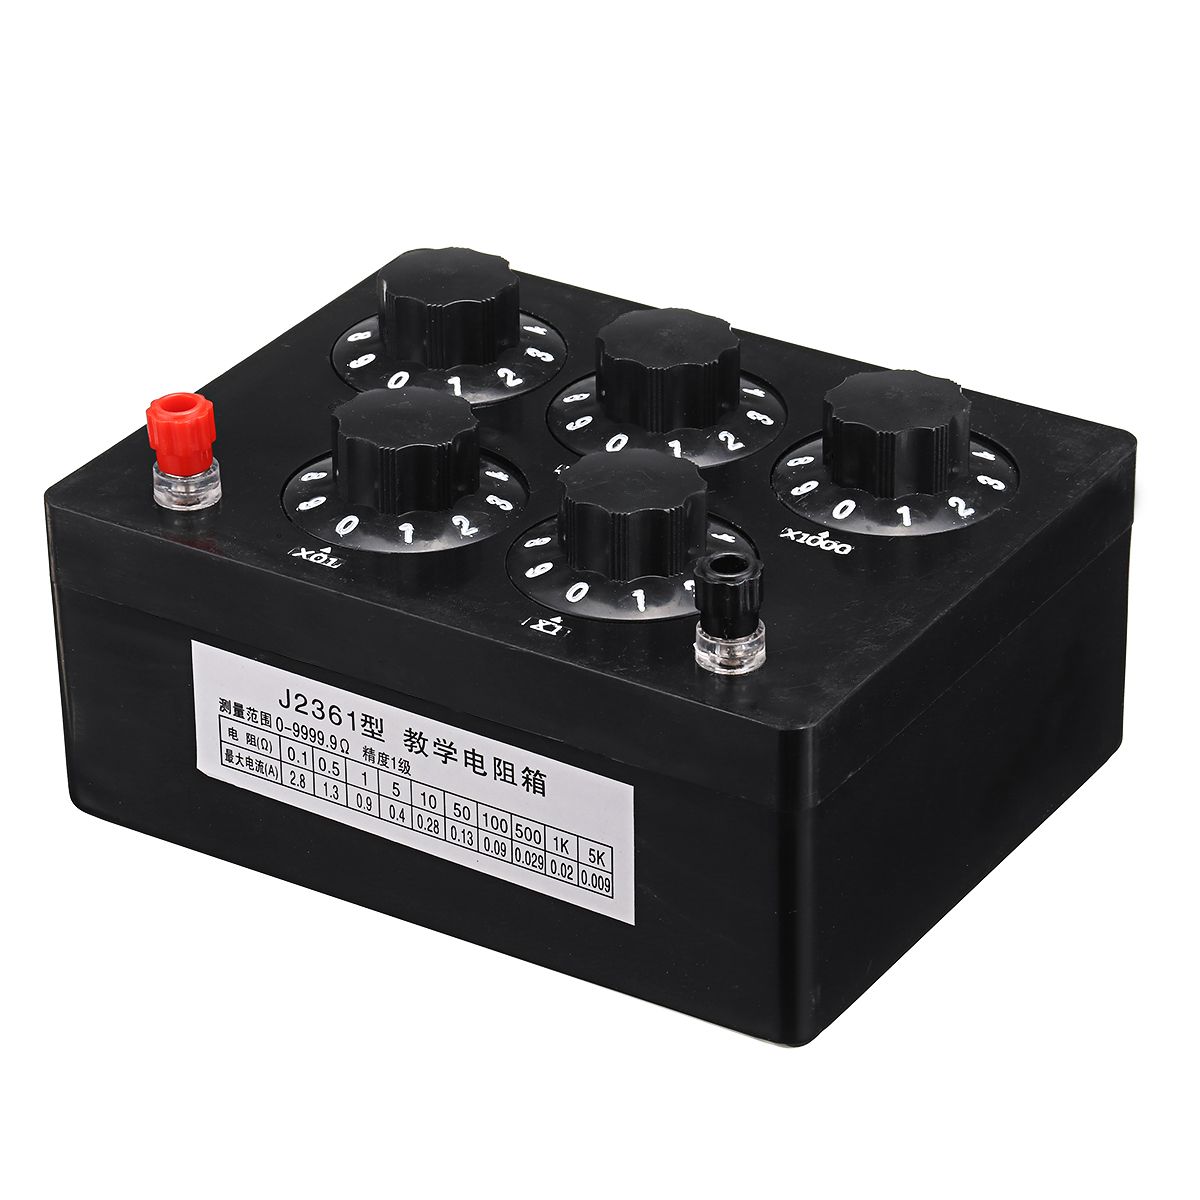 0-99999Omega-Variable-Resistor-Substitution-Box-Ohm-Adjustable-Substitution-Resistance-Knob-Switch-P-1443989